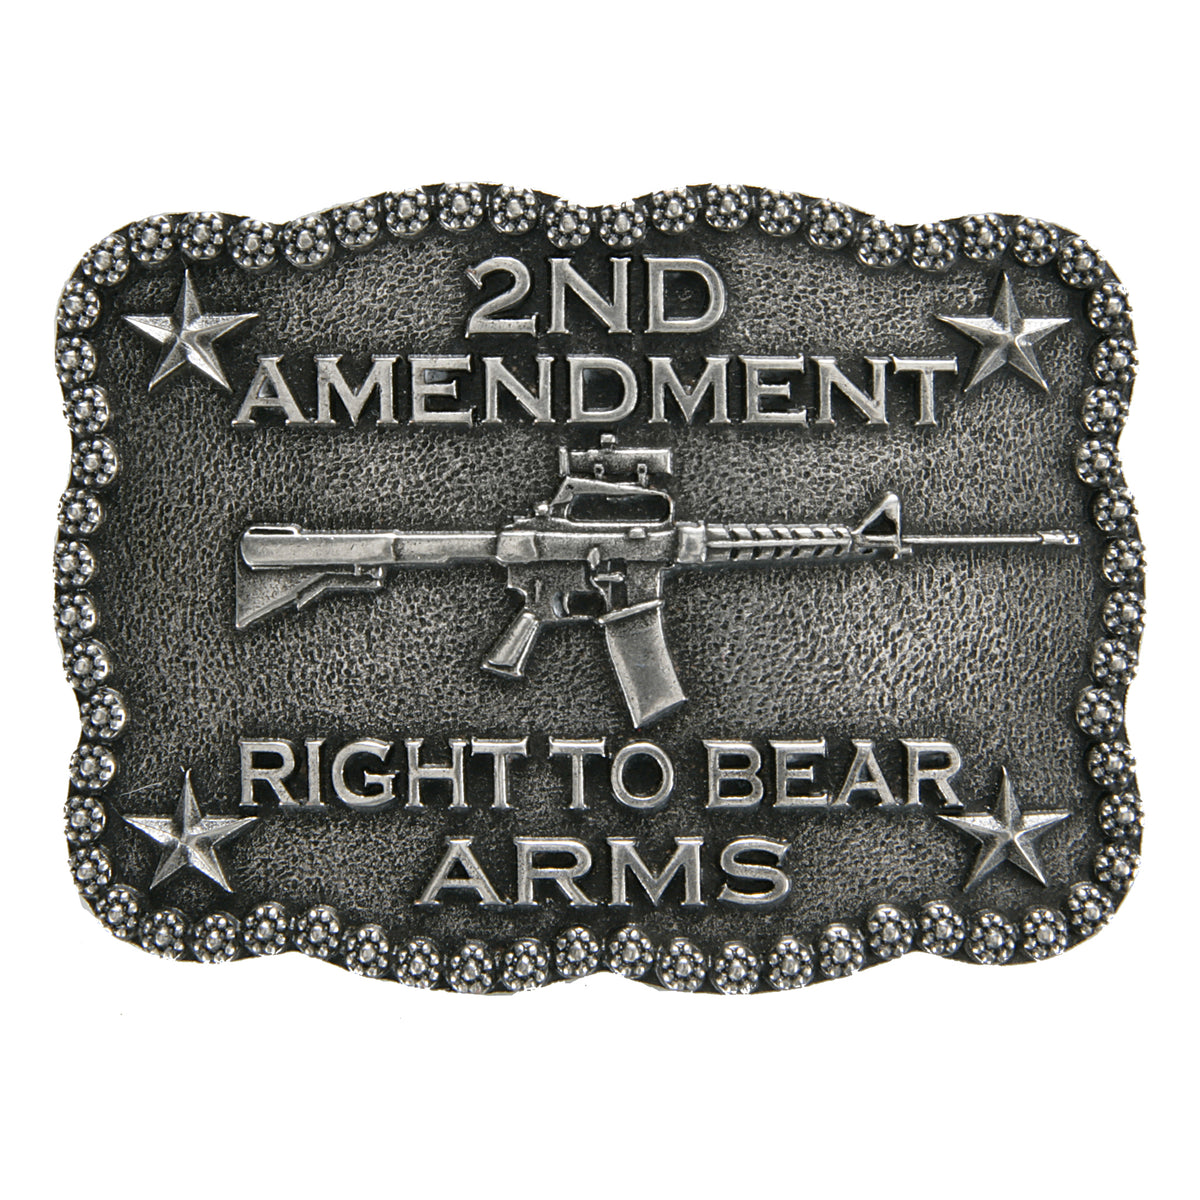 Scalloped 2nd Amendment Right to Bear Arms Buckle